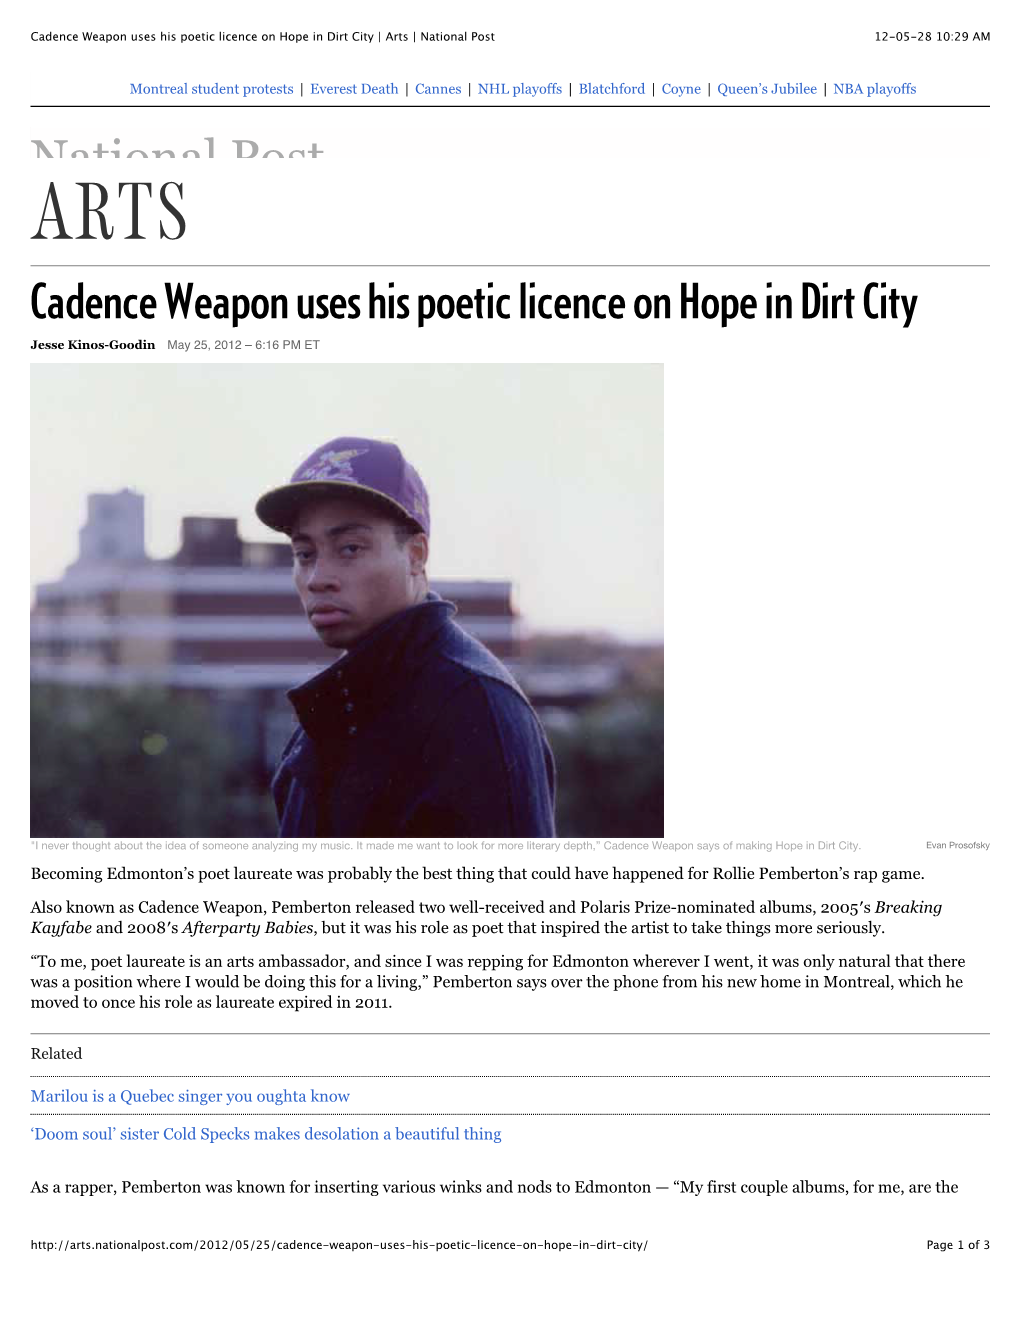 Cadence Weapon Uses His Poetic Licence on Hope in Dirt City | Arts | National Post 12-05-28 10:29 AM